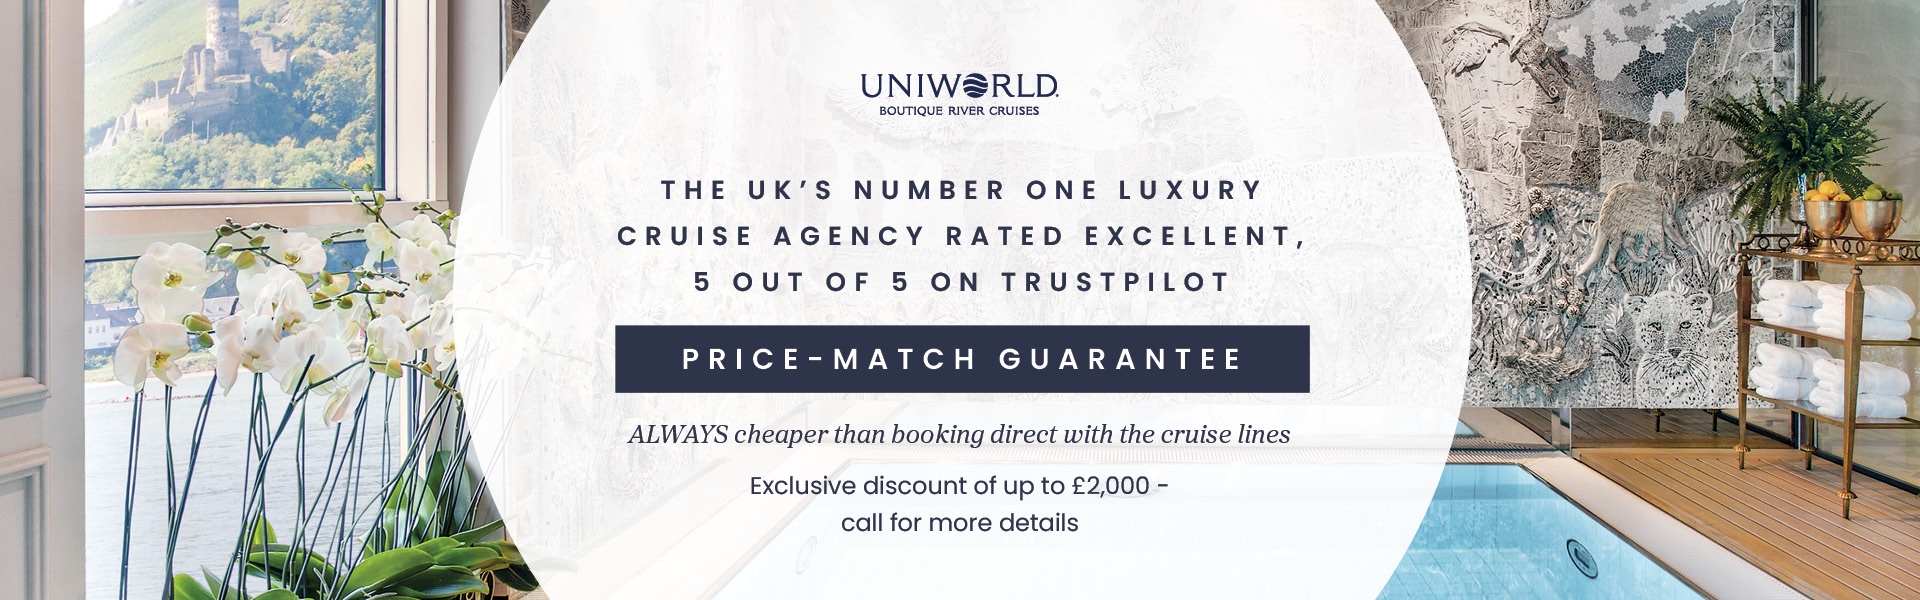 Why Book A Uniworld River Cruise With Panache Cruises